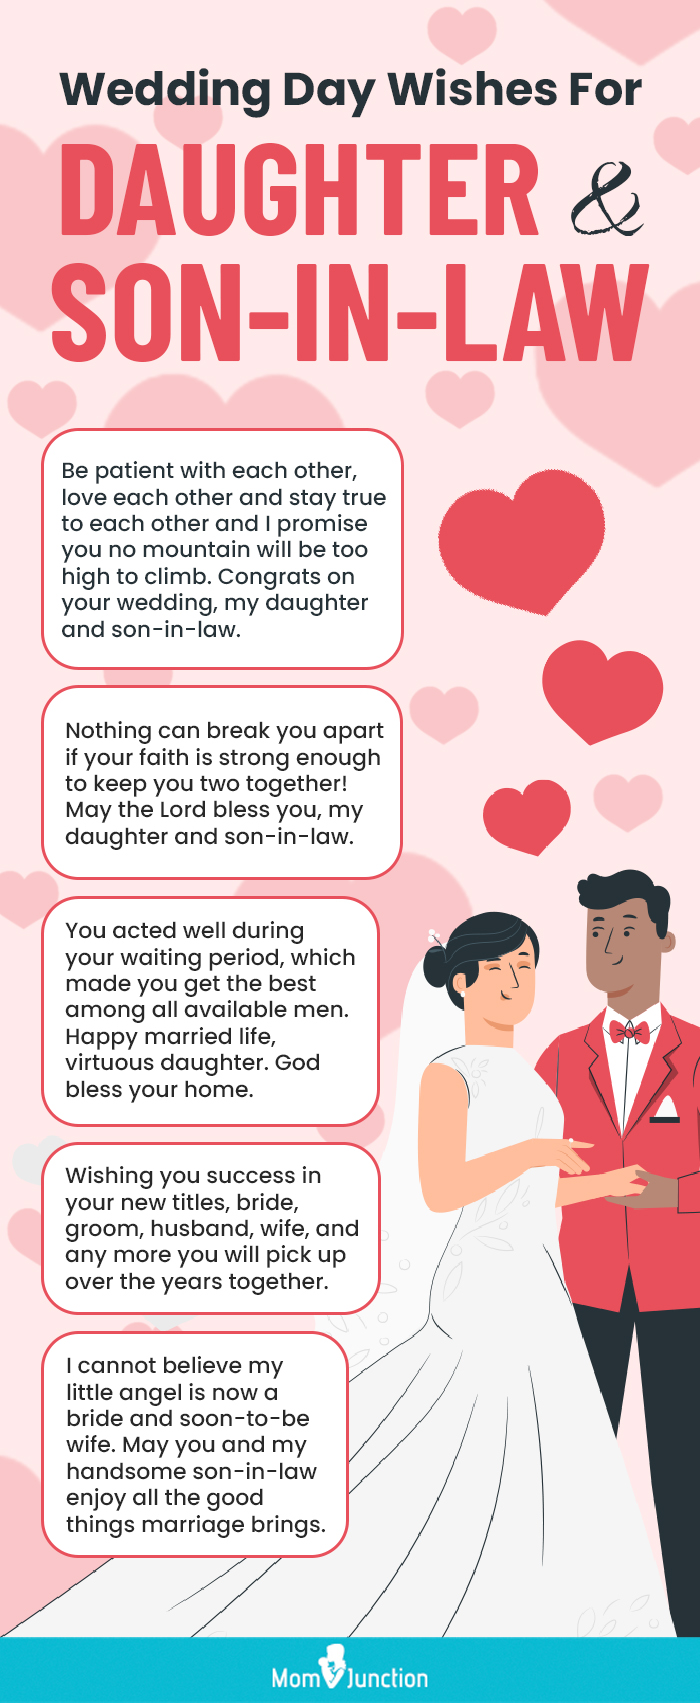 https://cdn2.momjunction.com/wp-content/uploads/2022/11/Wedding-Day-Wishes-For-Daughter-and-Son-In-Law.jpg